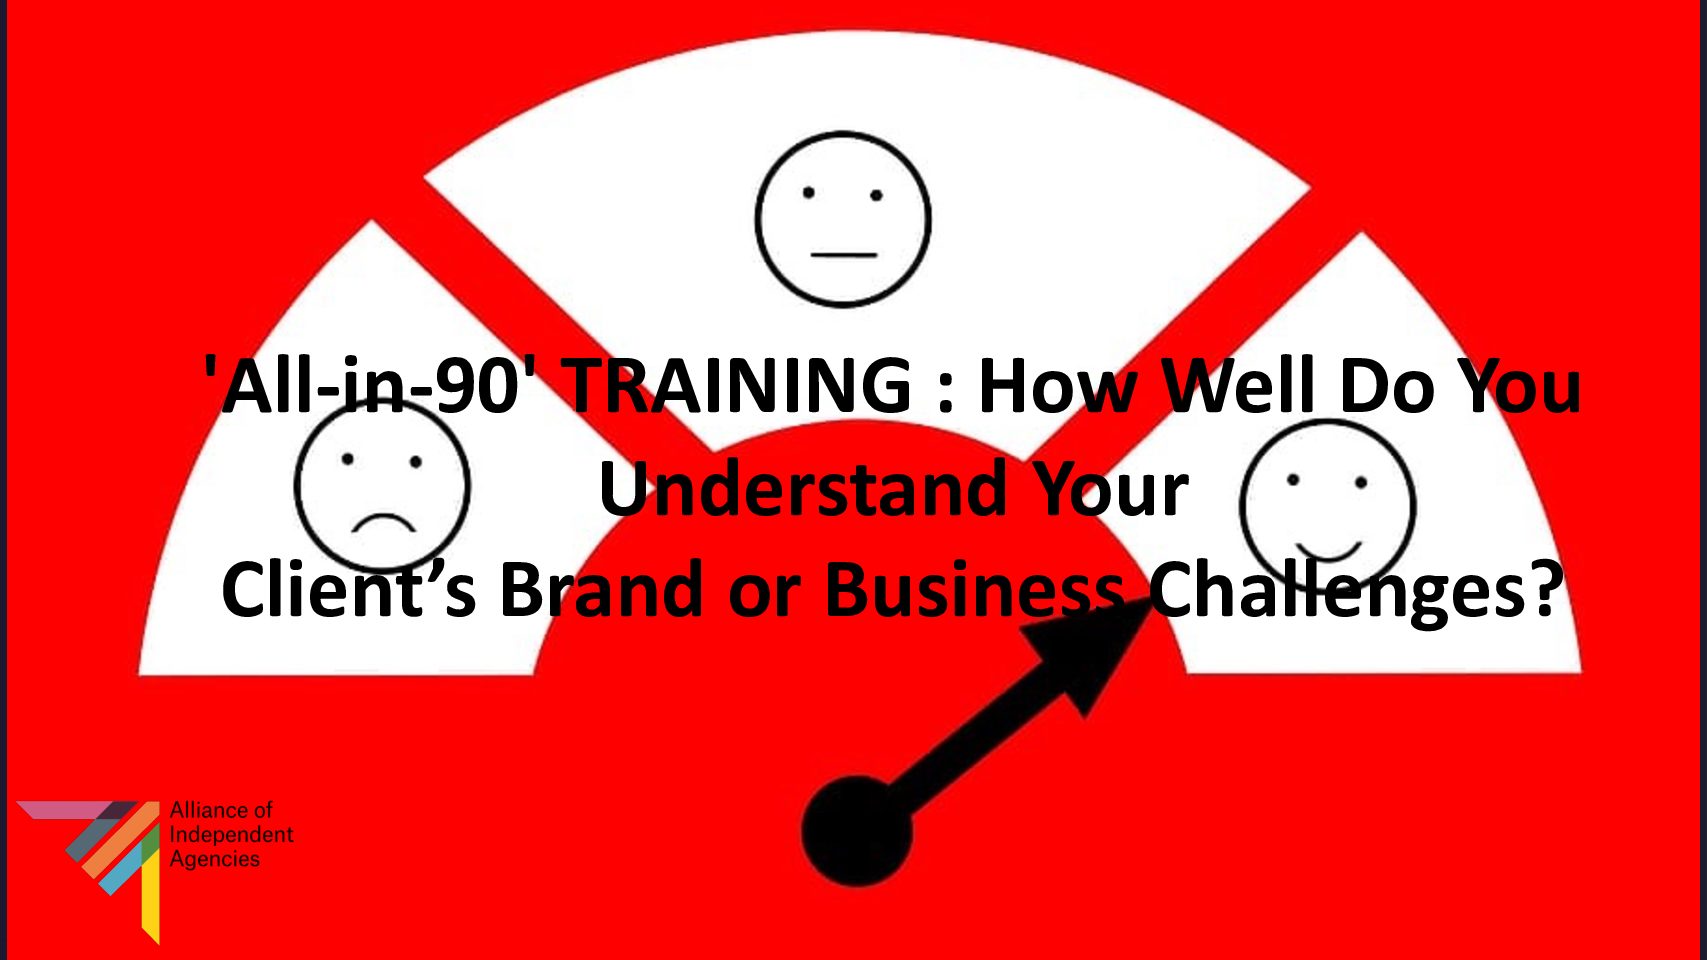 'All-in-90' TRAINING : How Well Do You Understand Your Client's Brand or Business Challenges?